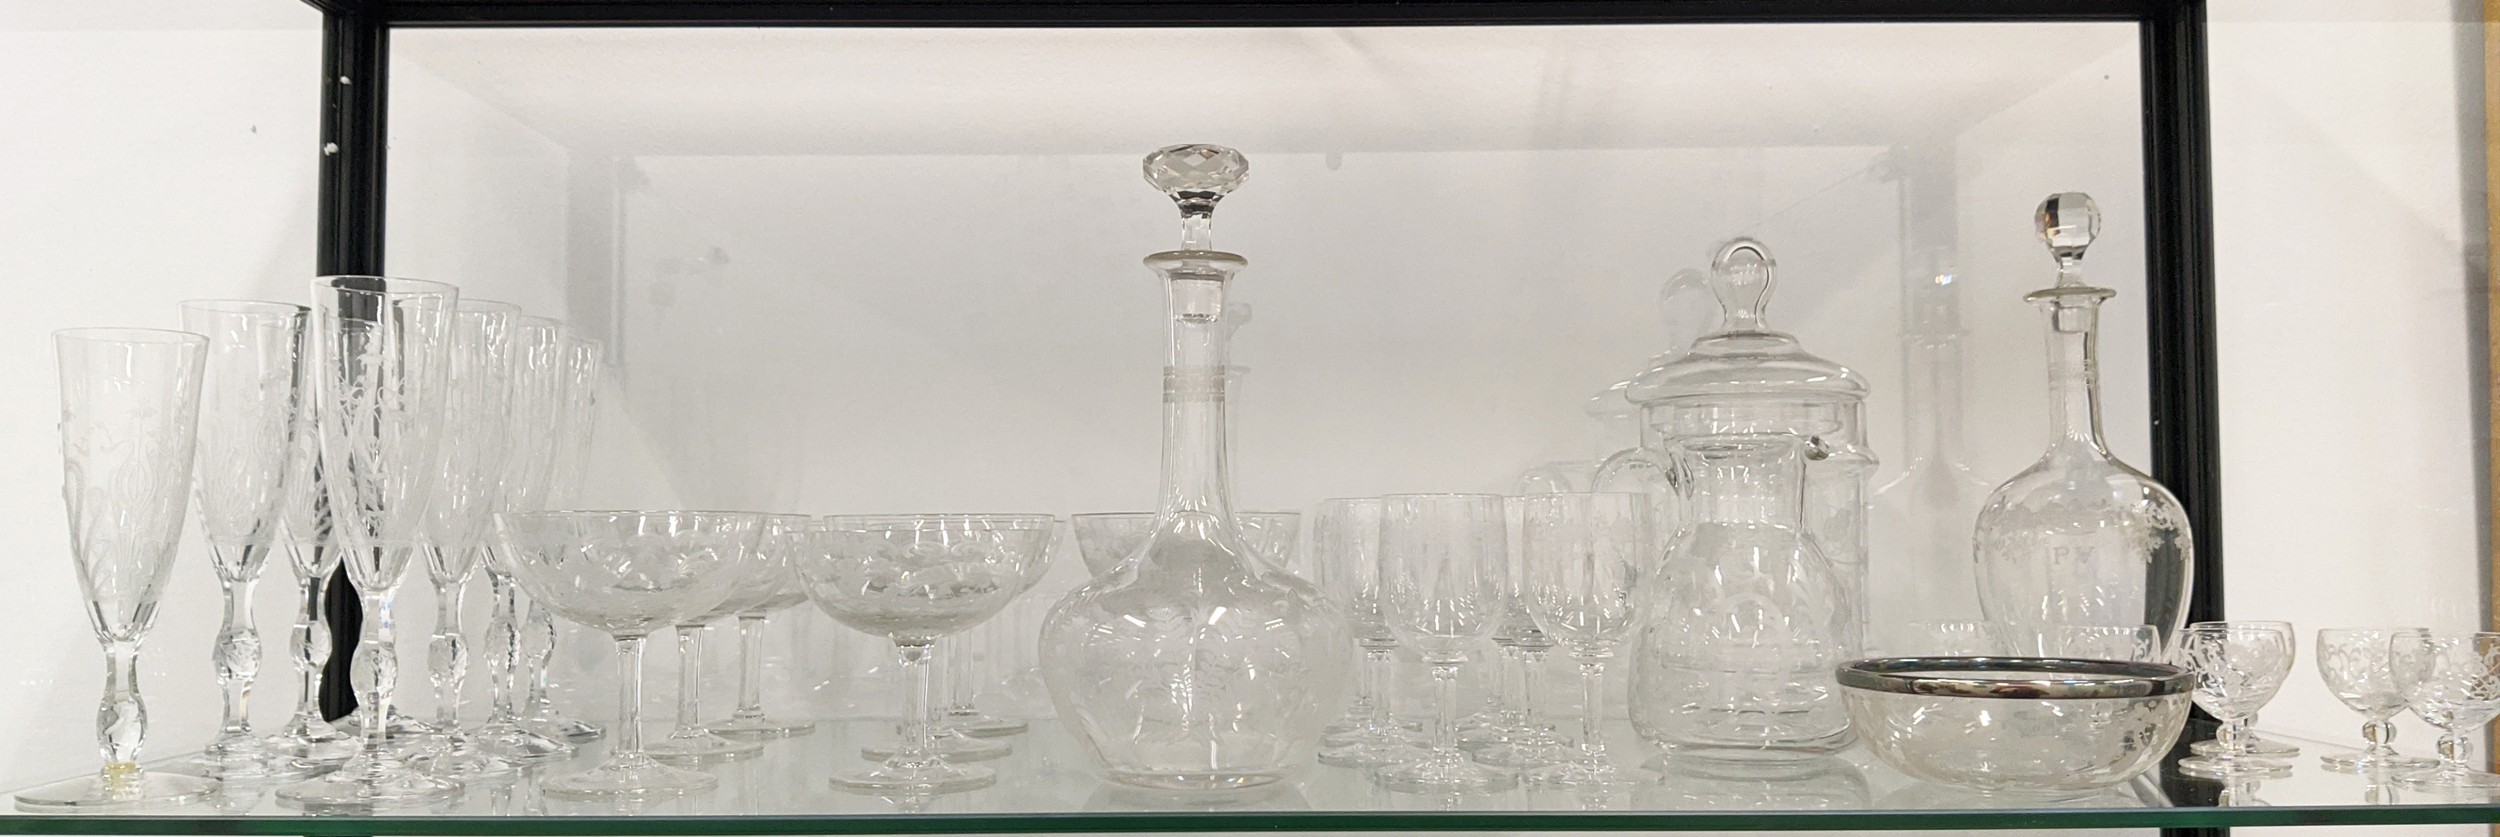 QUANTITY OF ENGRAVED GLASSWARE, including eight champagne flutes, decanter vodka glass set, eight - Image 2 of 9